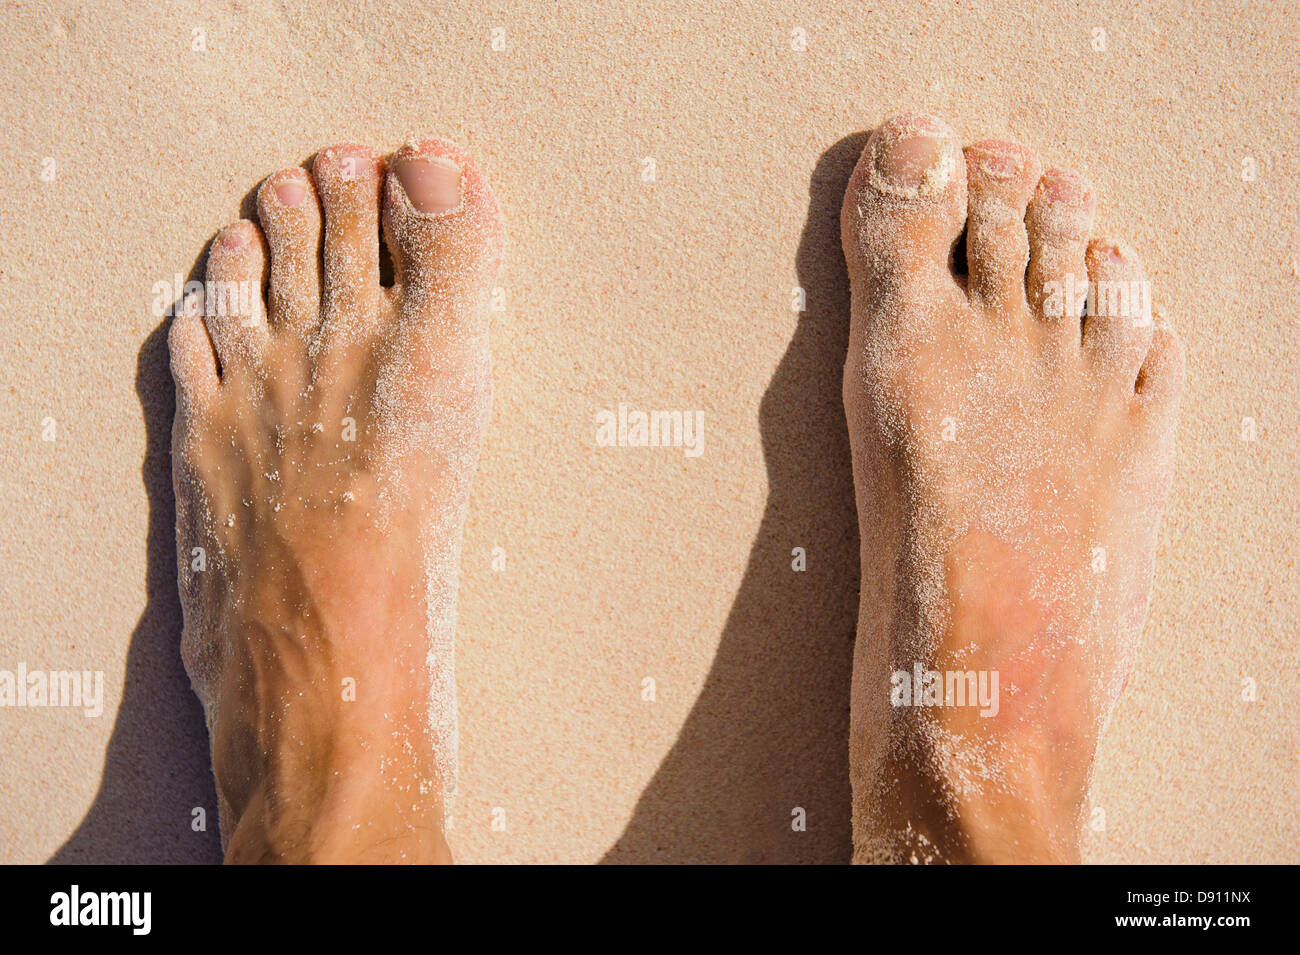 View of mans feet on sand Stock Photo